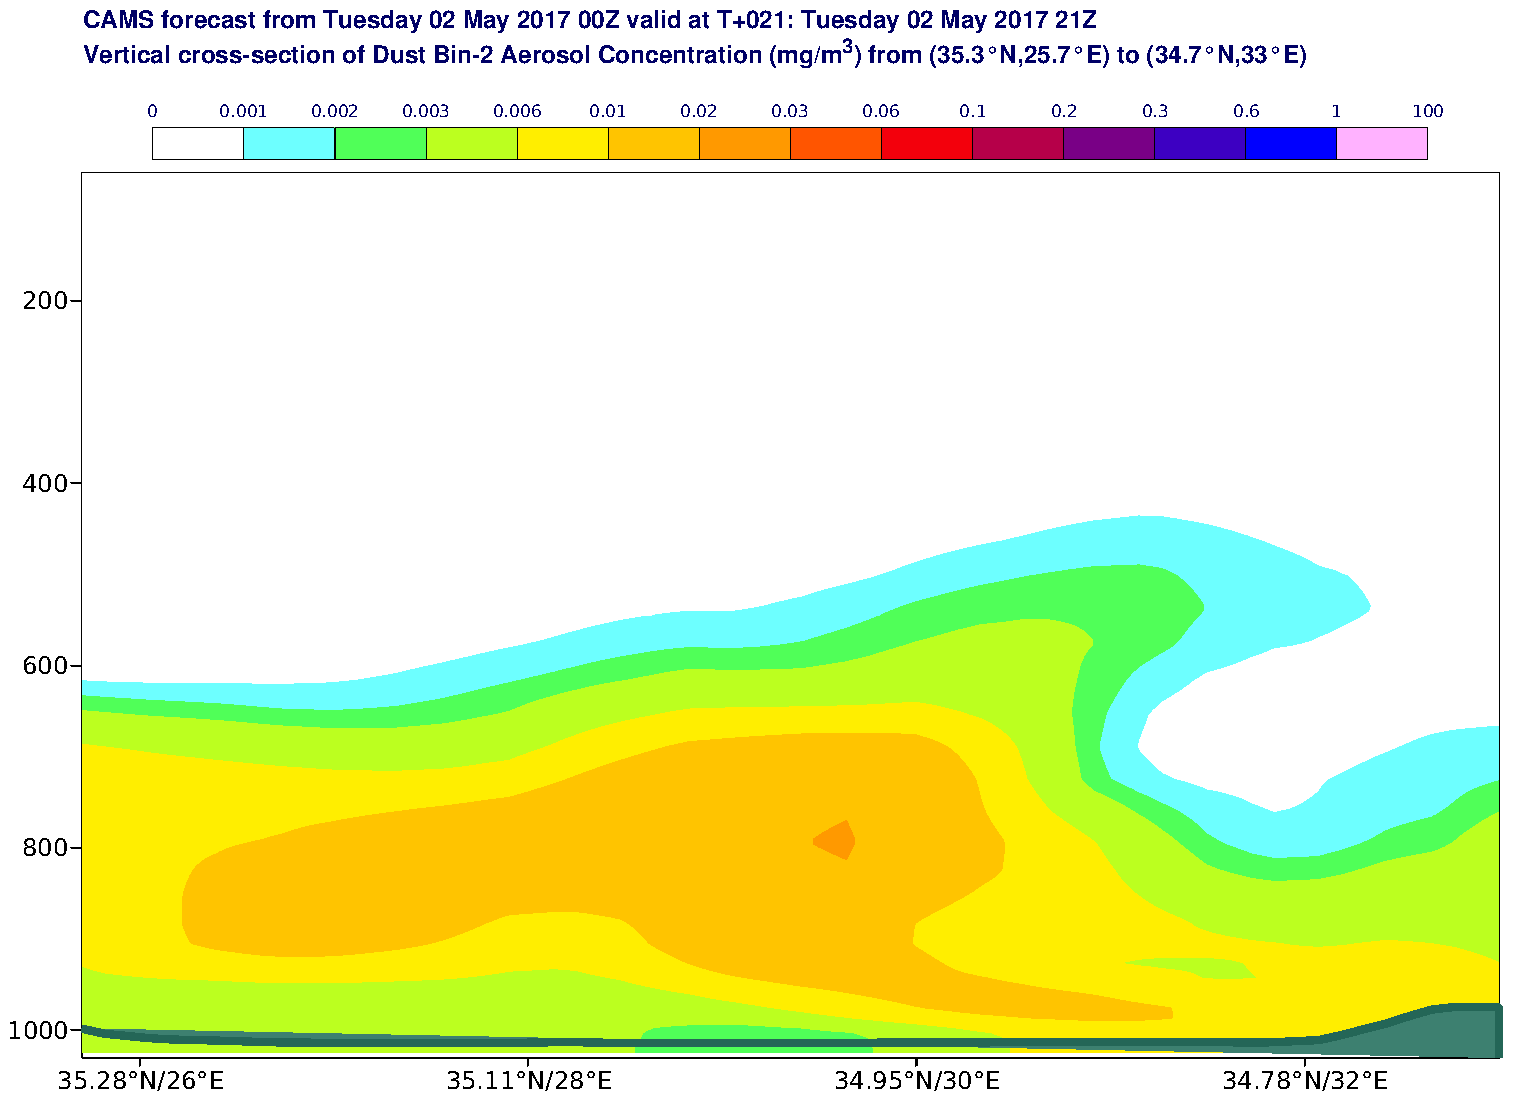 Vertical cross-section of Dust Bin-2 Aerosol Concentration (mg/m3) valid at T21 - 2017-05-02 21:00